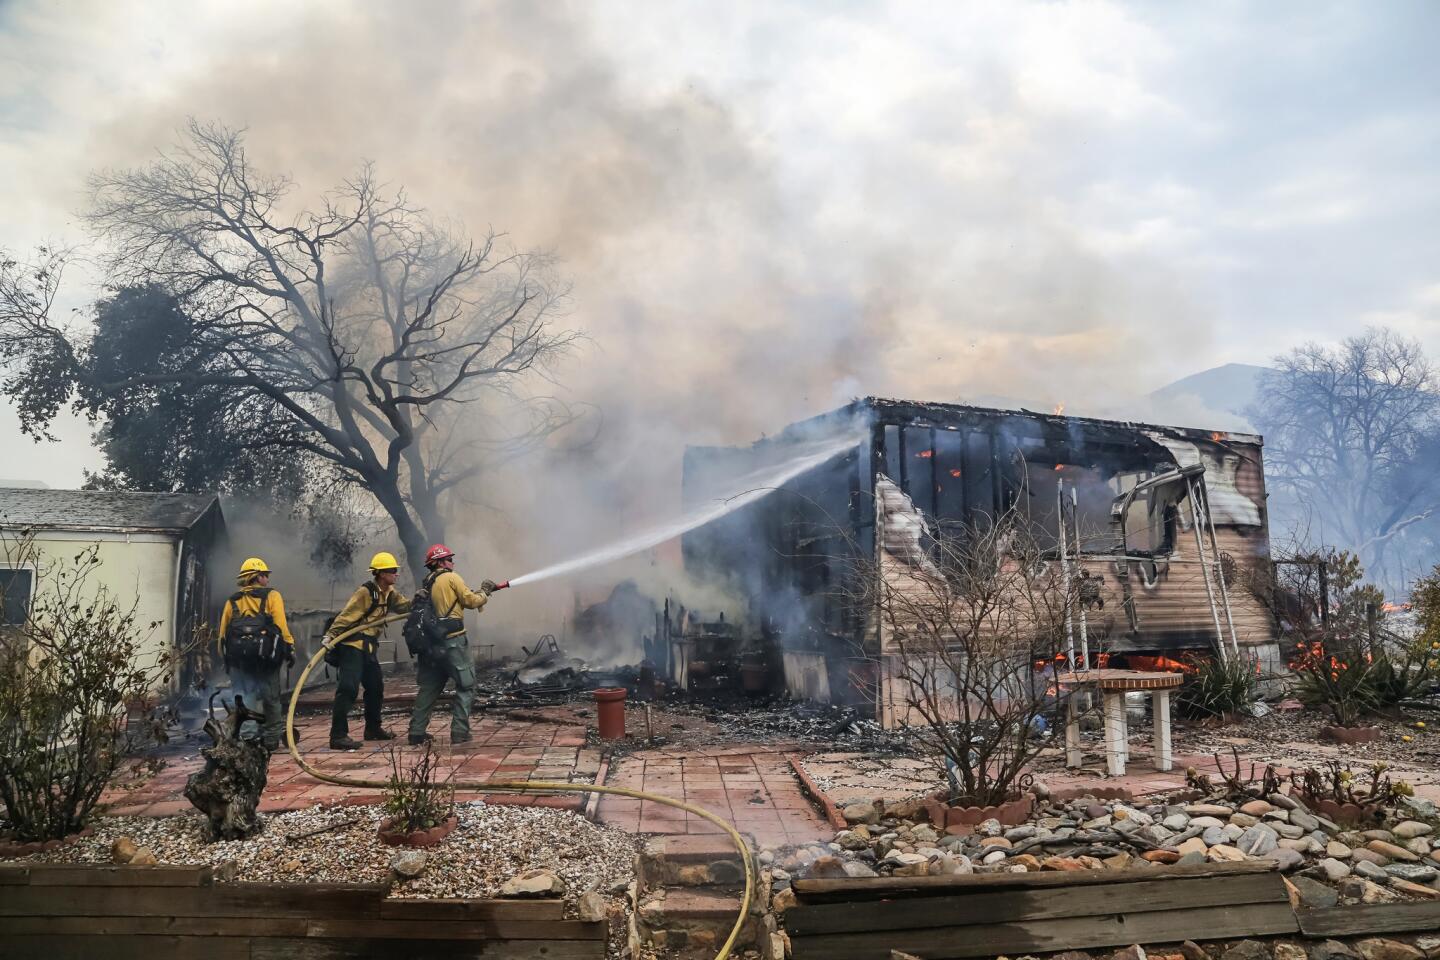 Firefighters battle flames at the Alpine Oaks Estates mobile home park on Friday during a fire in Alpine, California.